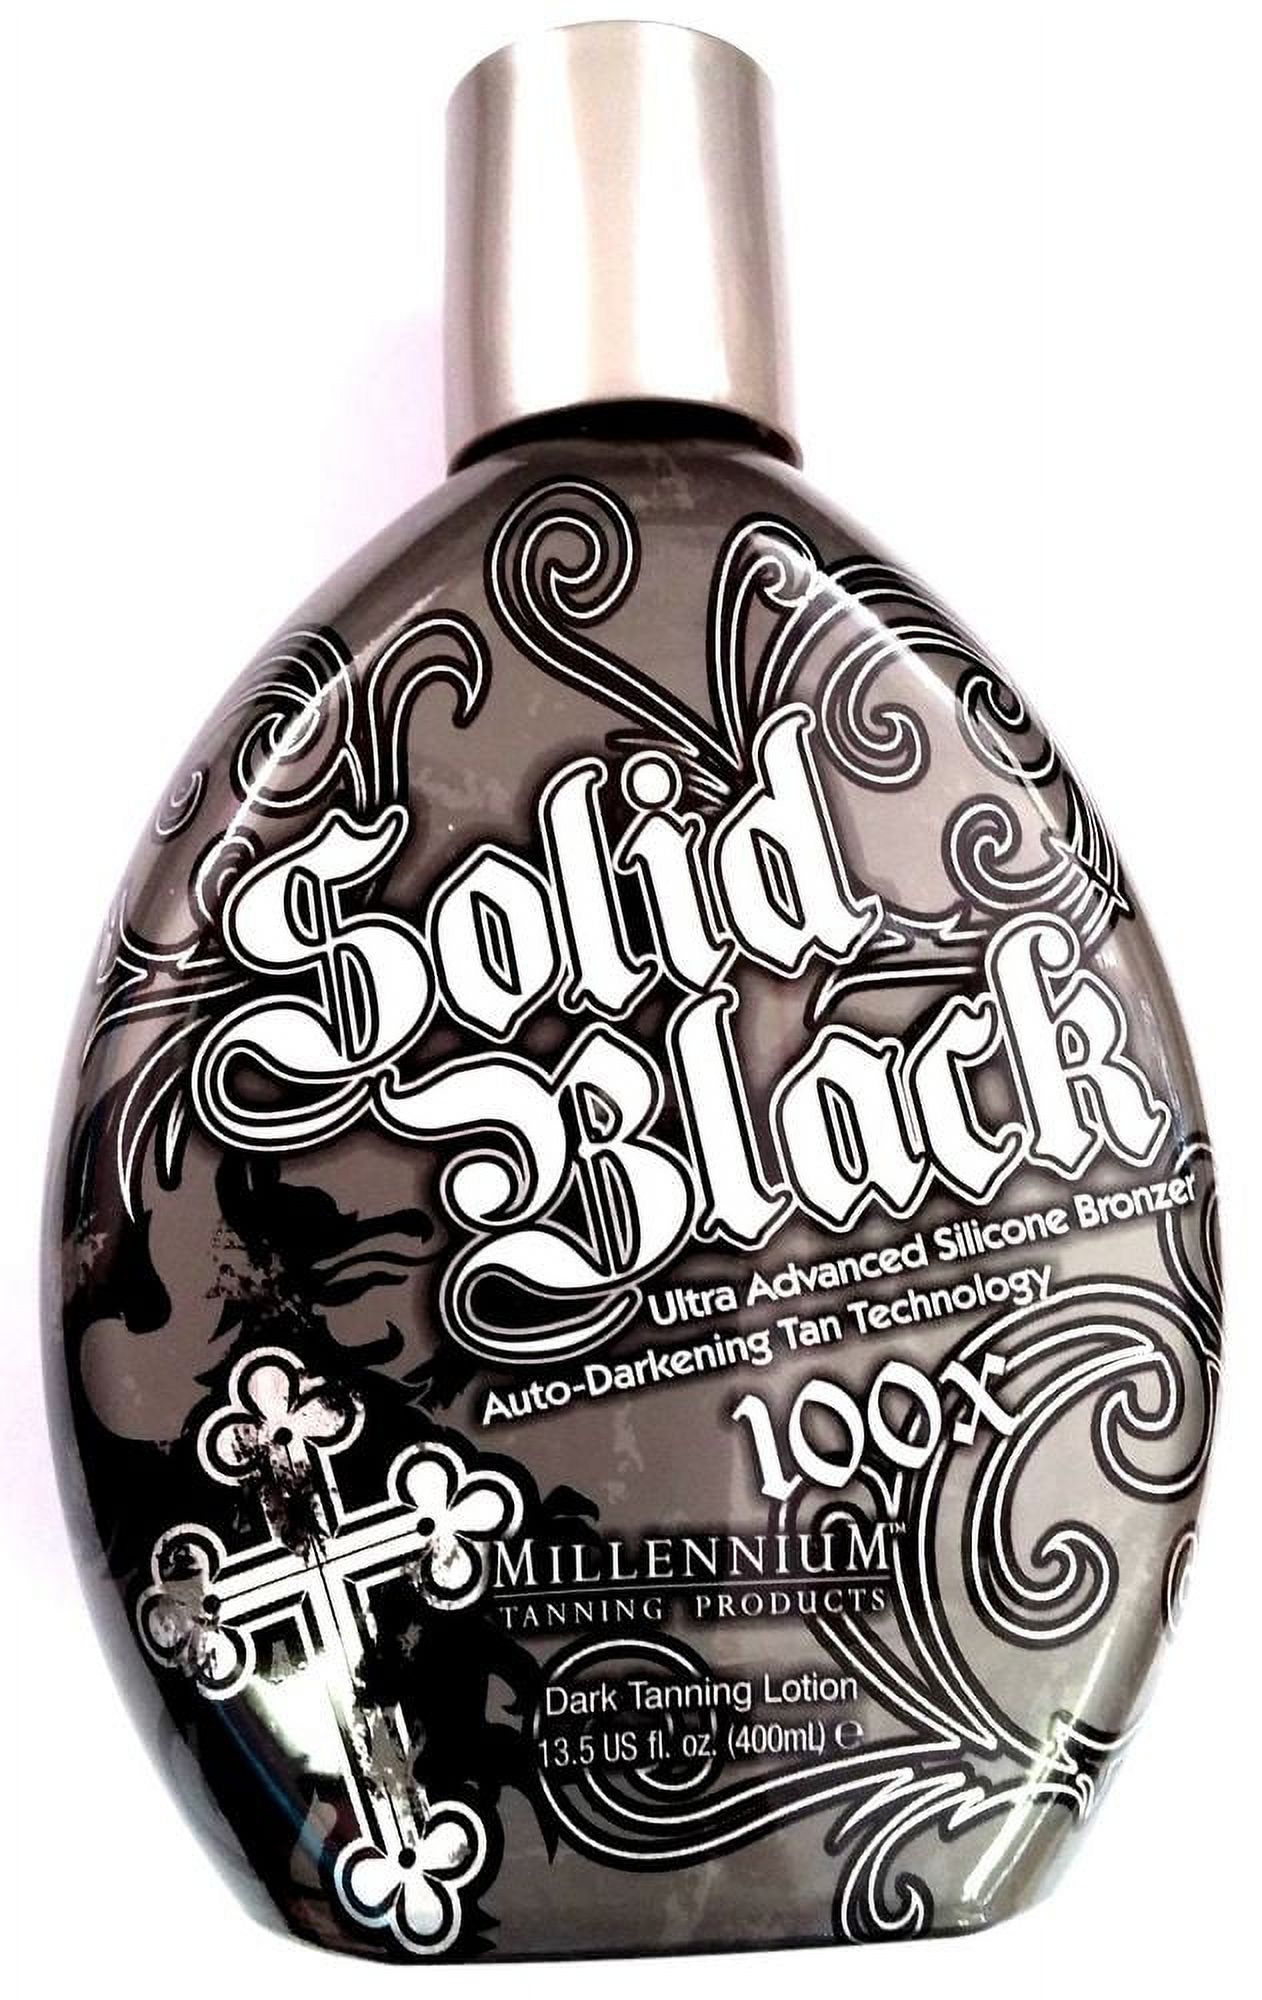 Millennium Tanning Solid Black Tanning Lotion - image 1 of 4